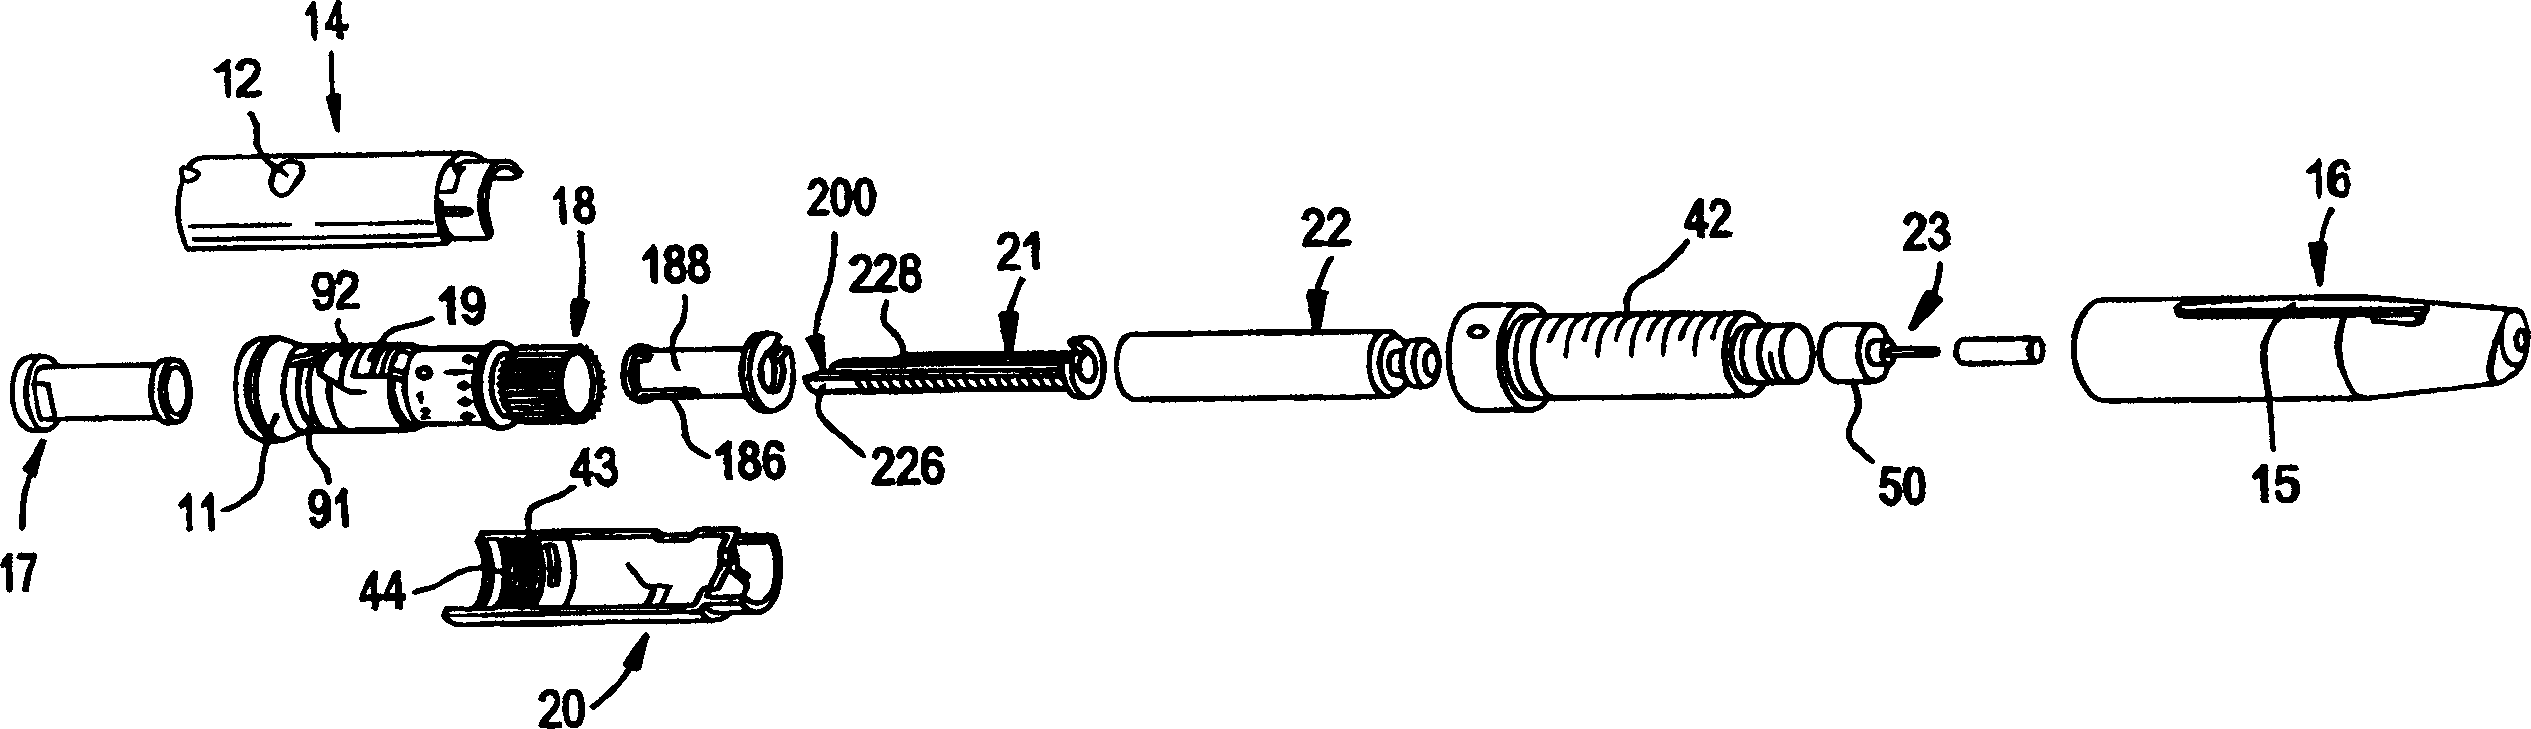 Pen device for administration of parathyroid hormone